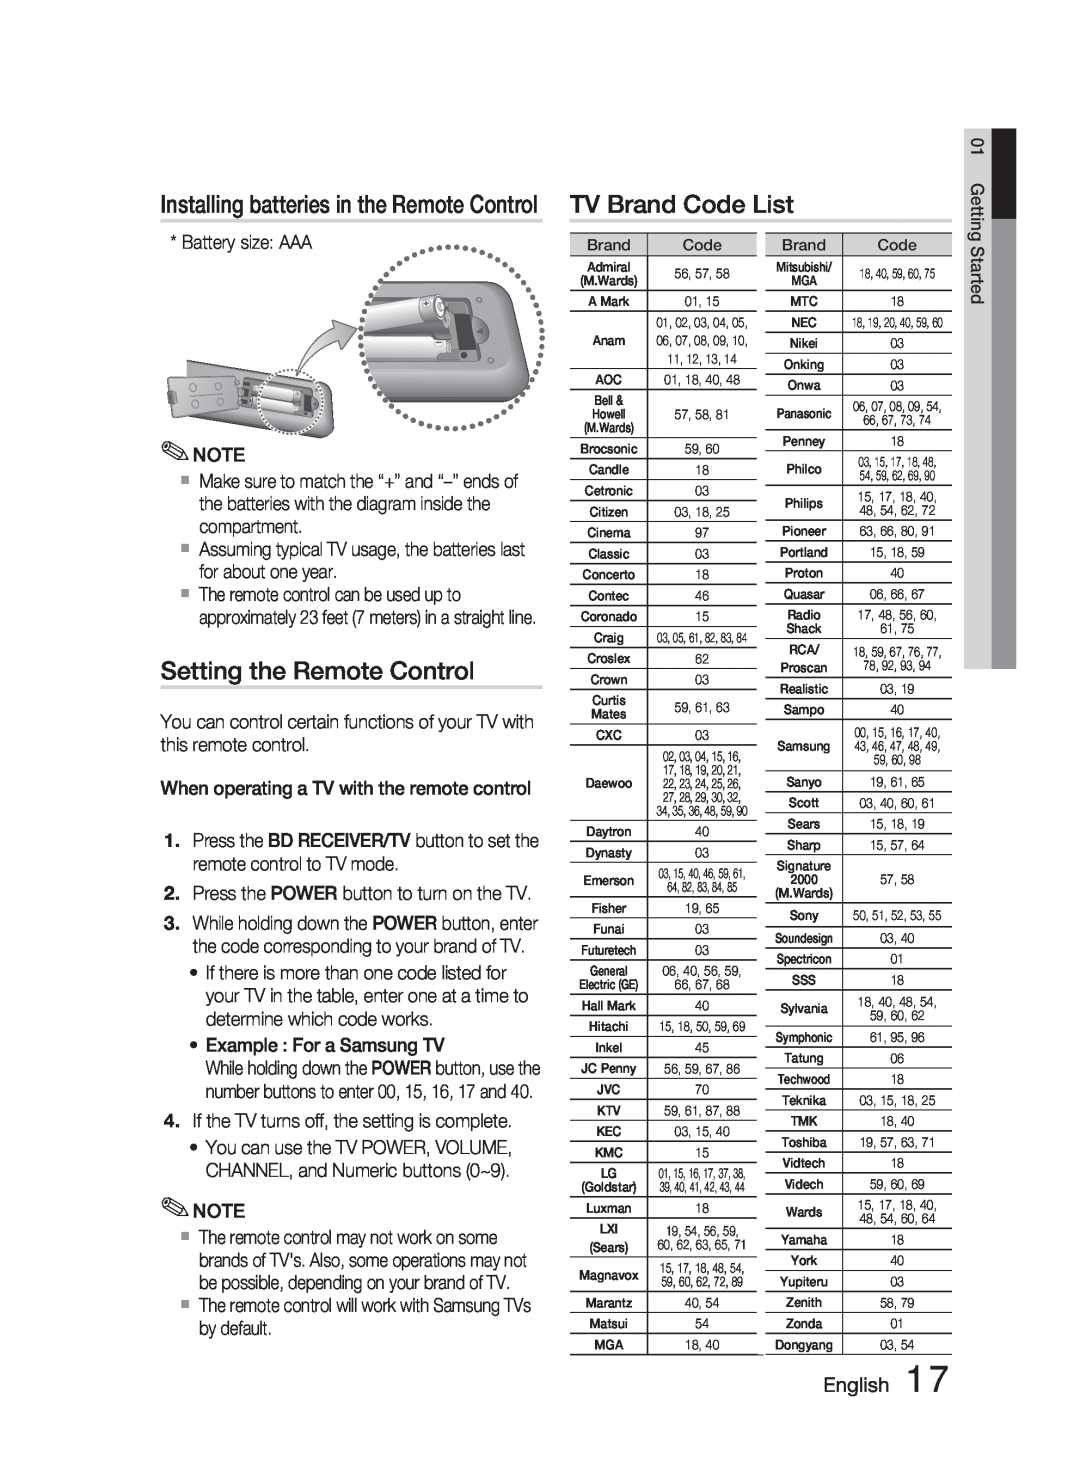 Samsung HT-C5500 TV Brand Code List, Setting the Remote Control, Installing batteries in the Remote Control, English 